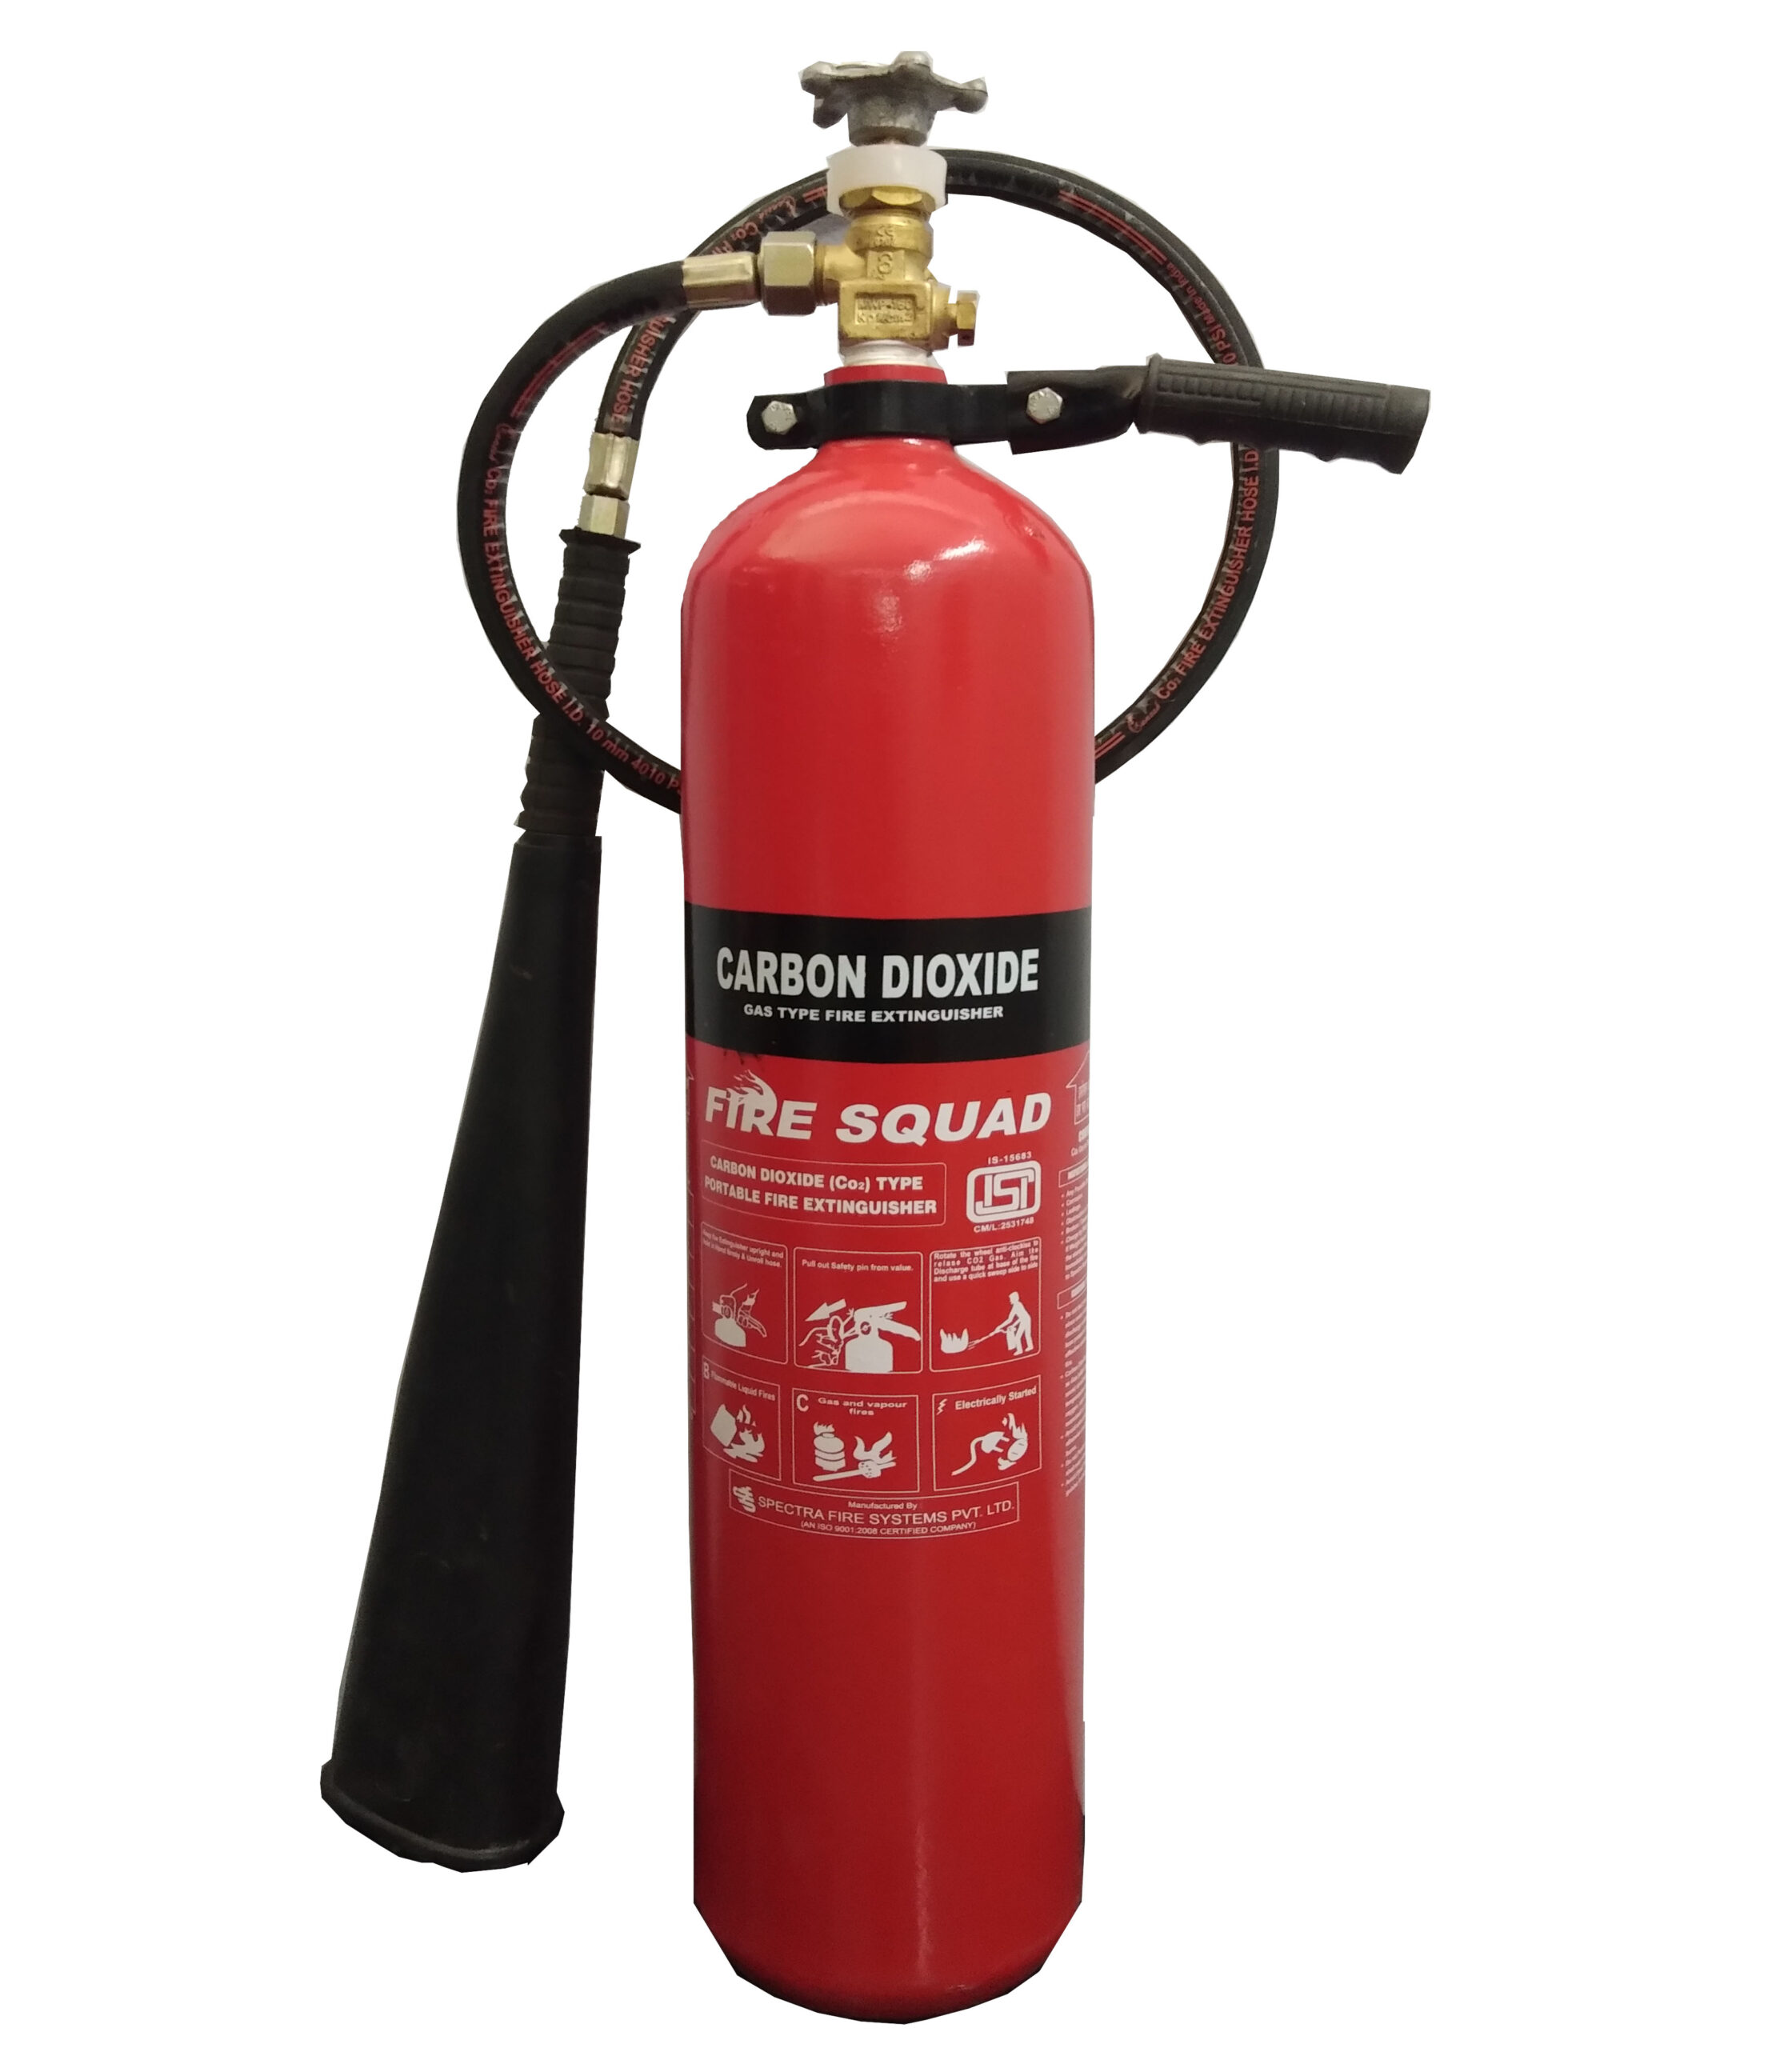 Co2 Type Fire Extinguisher Capacity 45kg Brand Fire Squad Daman Fire Service 8758